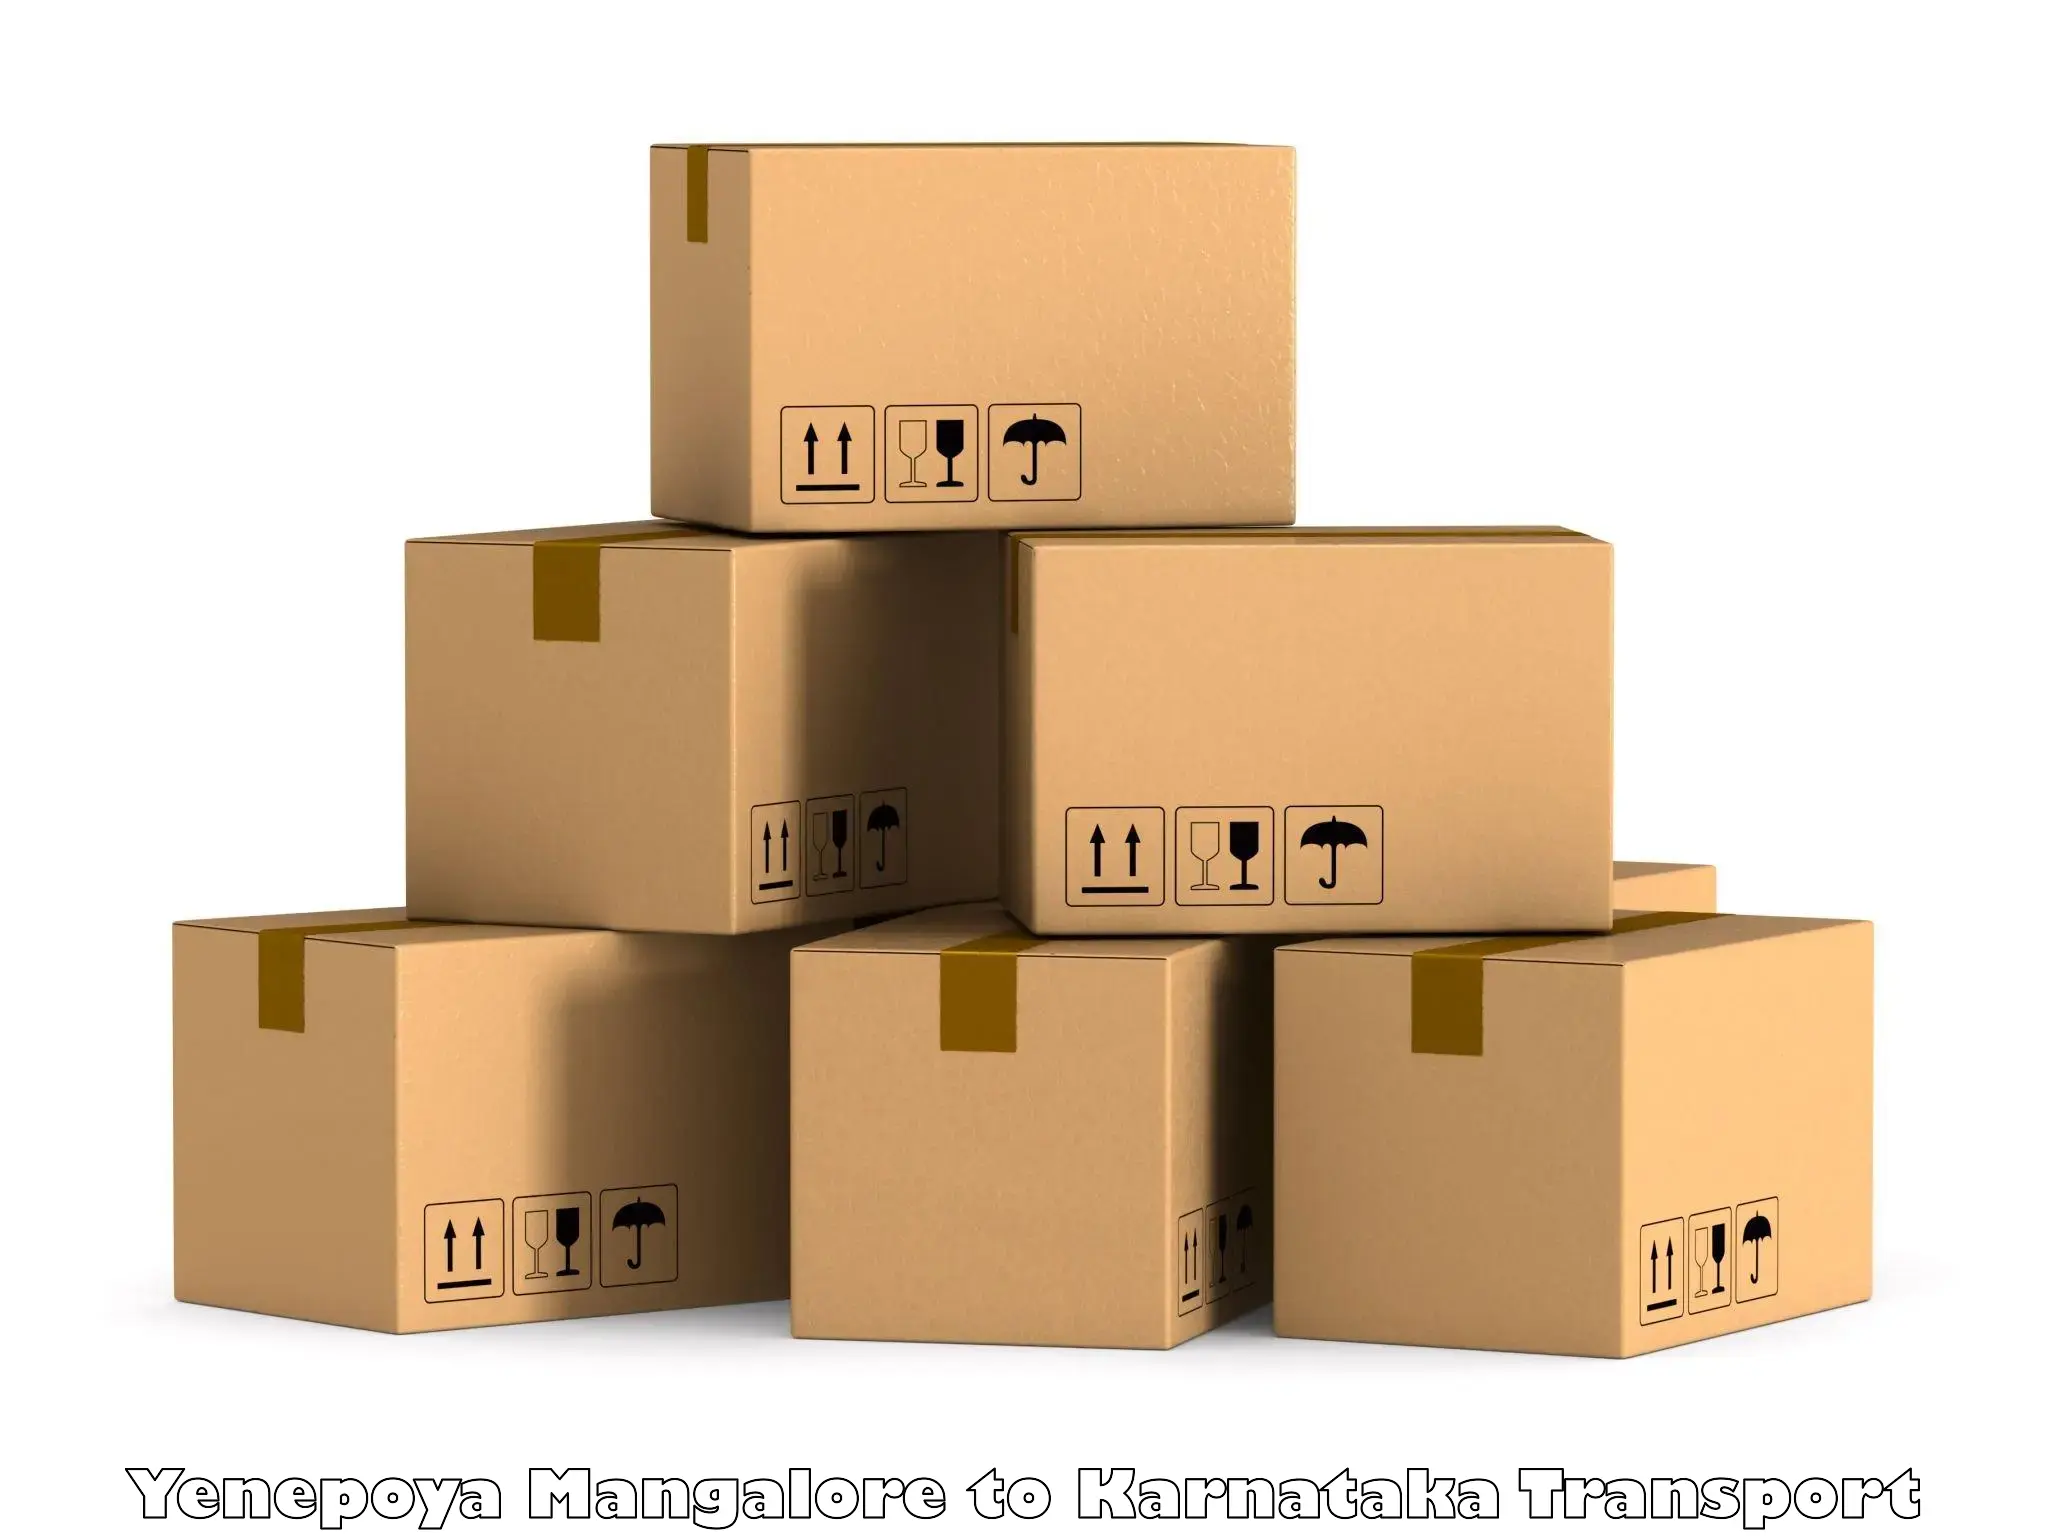 Package delivery services in Yenepoya Mangalore to Chikkaballapur